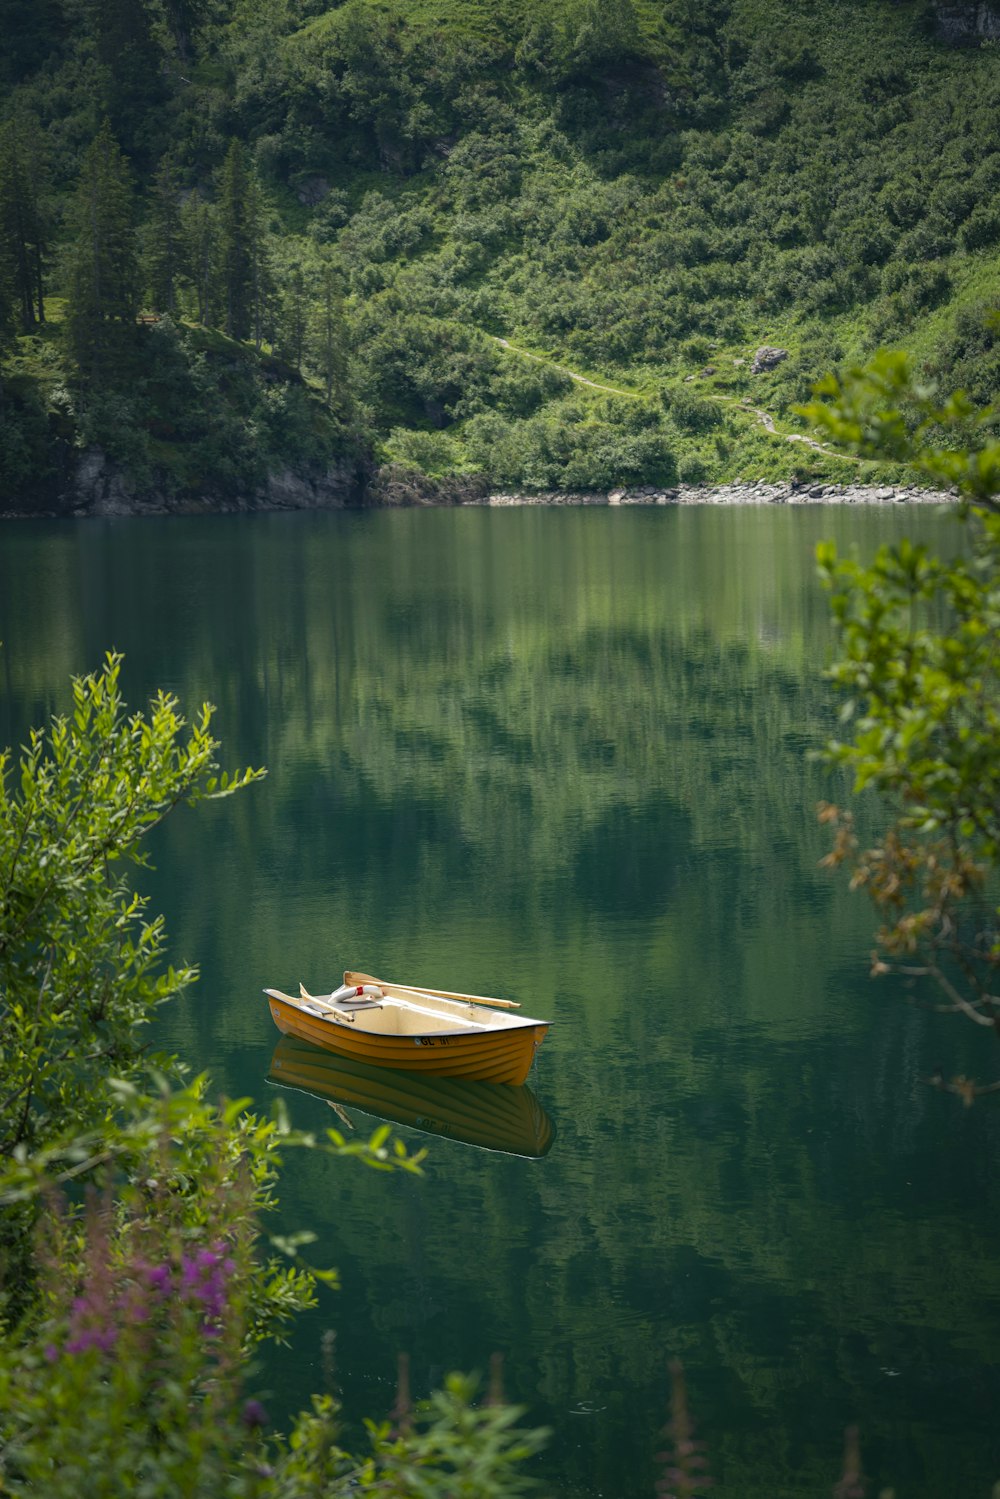 brown wooden boat on lake during daytime